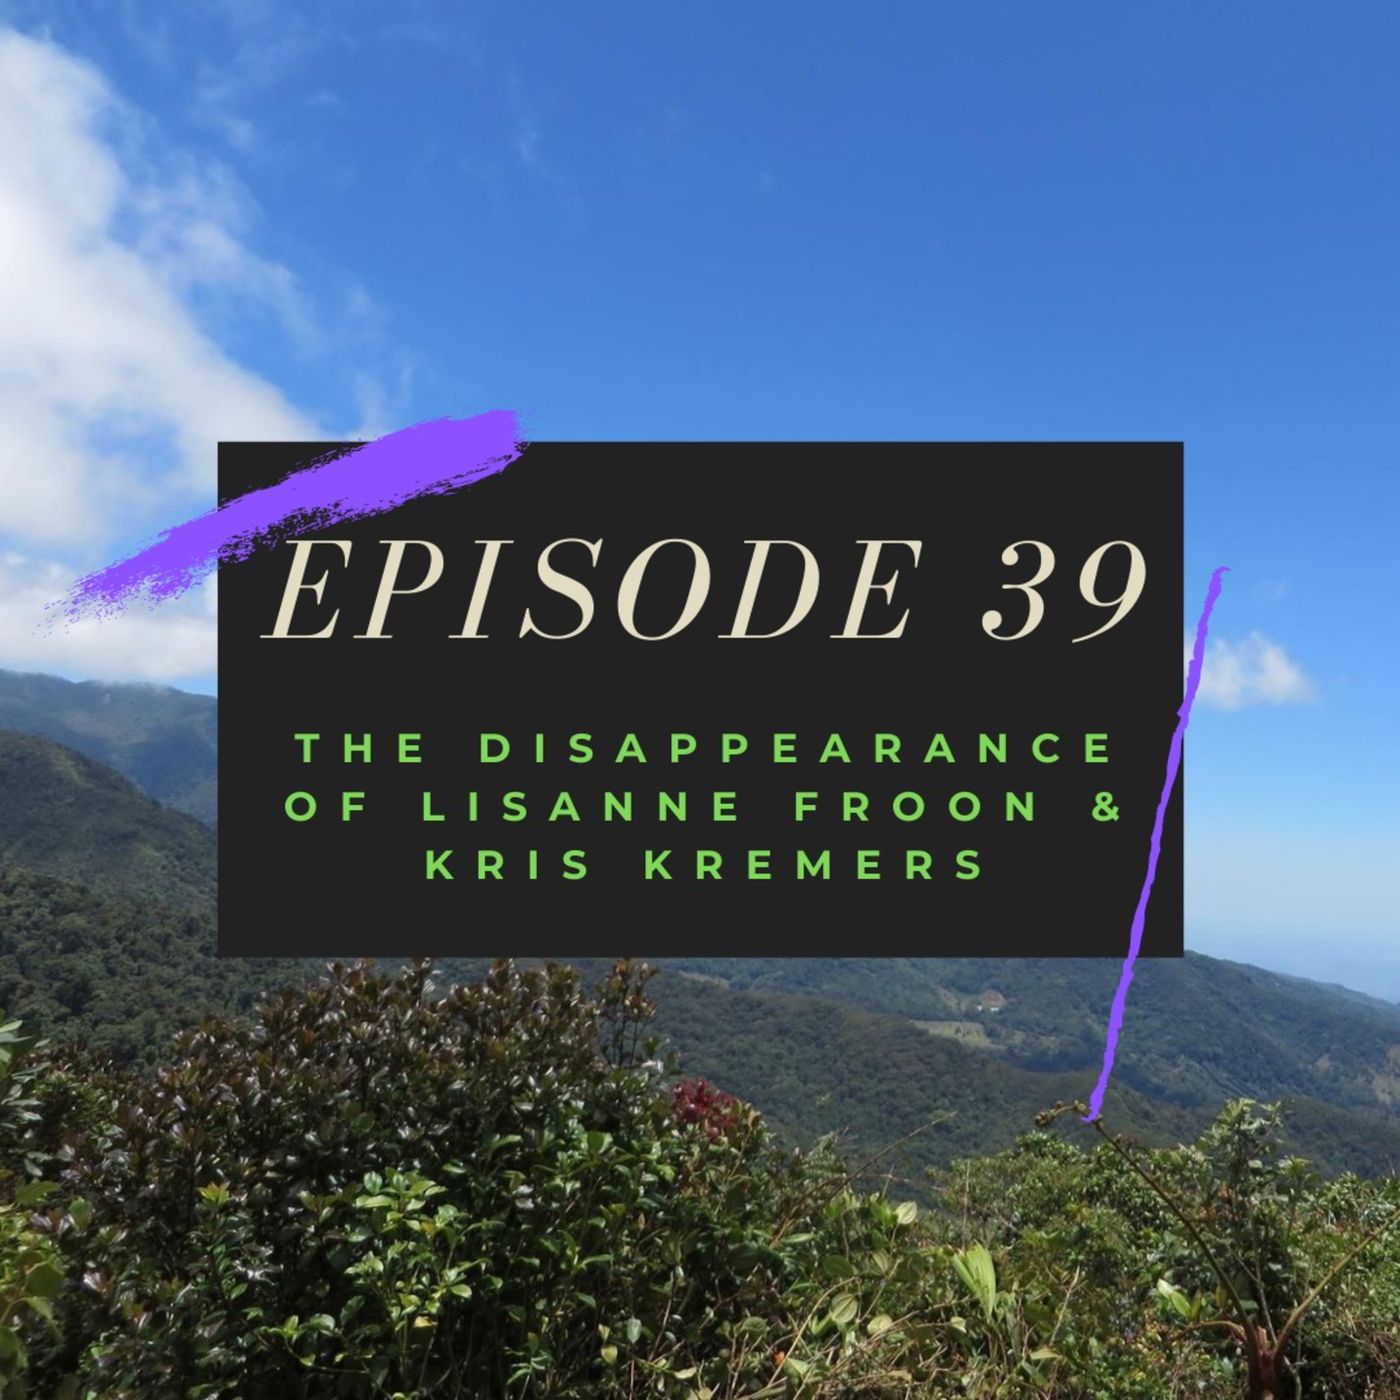 Ep. 39: The Disappearance of Lisanne Froon & Kris Kremers Image